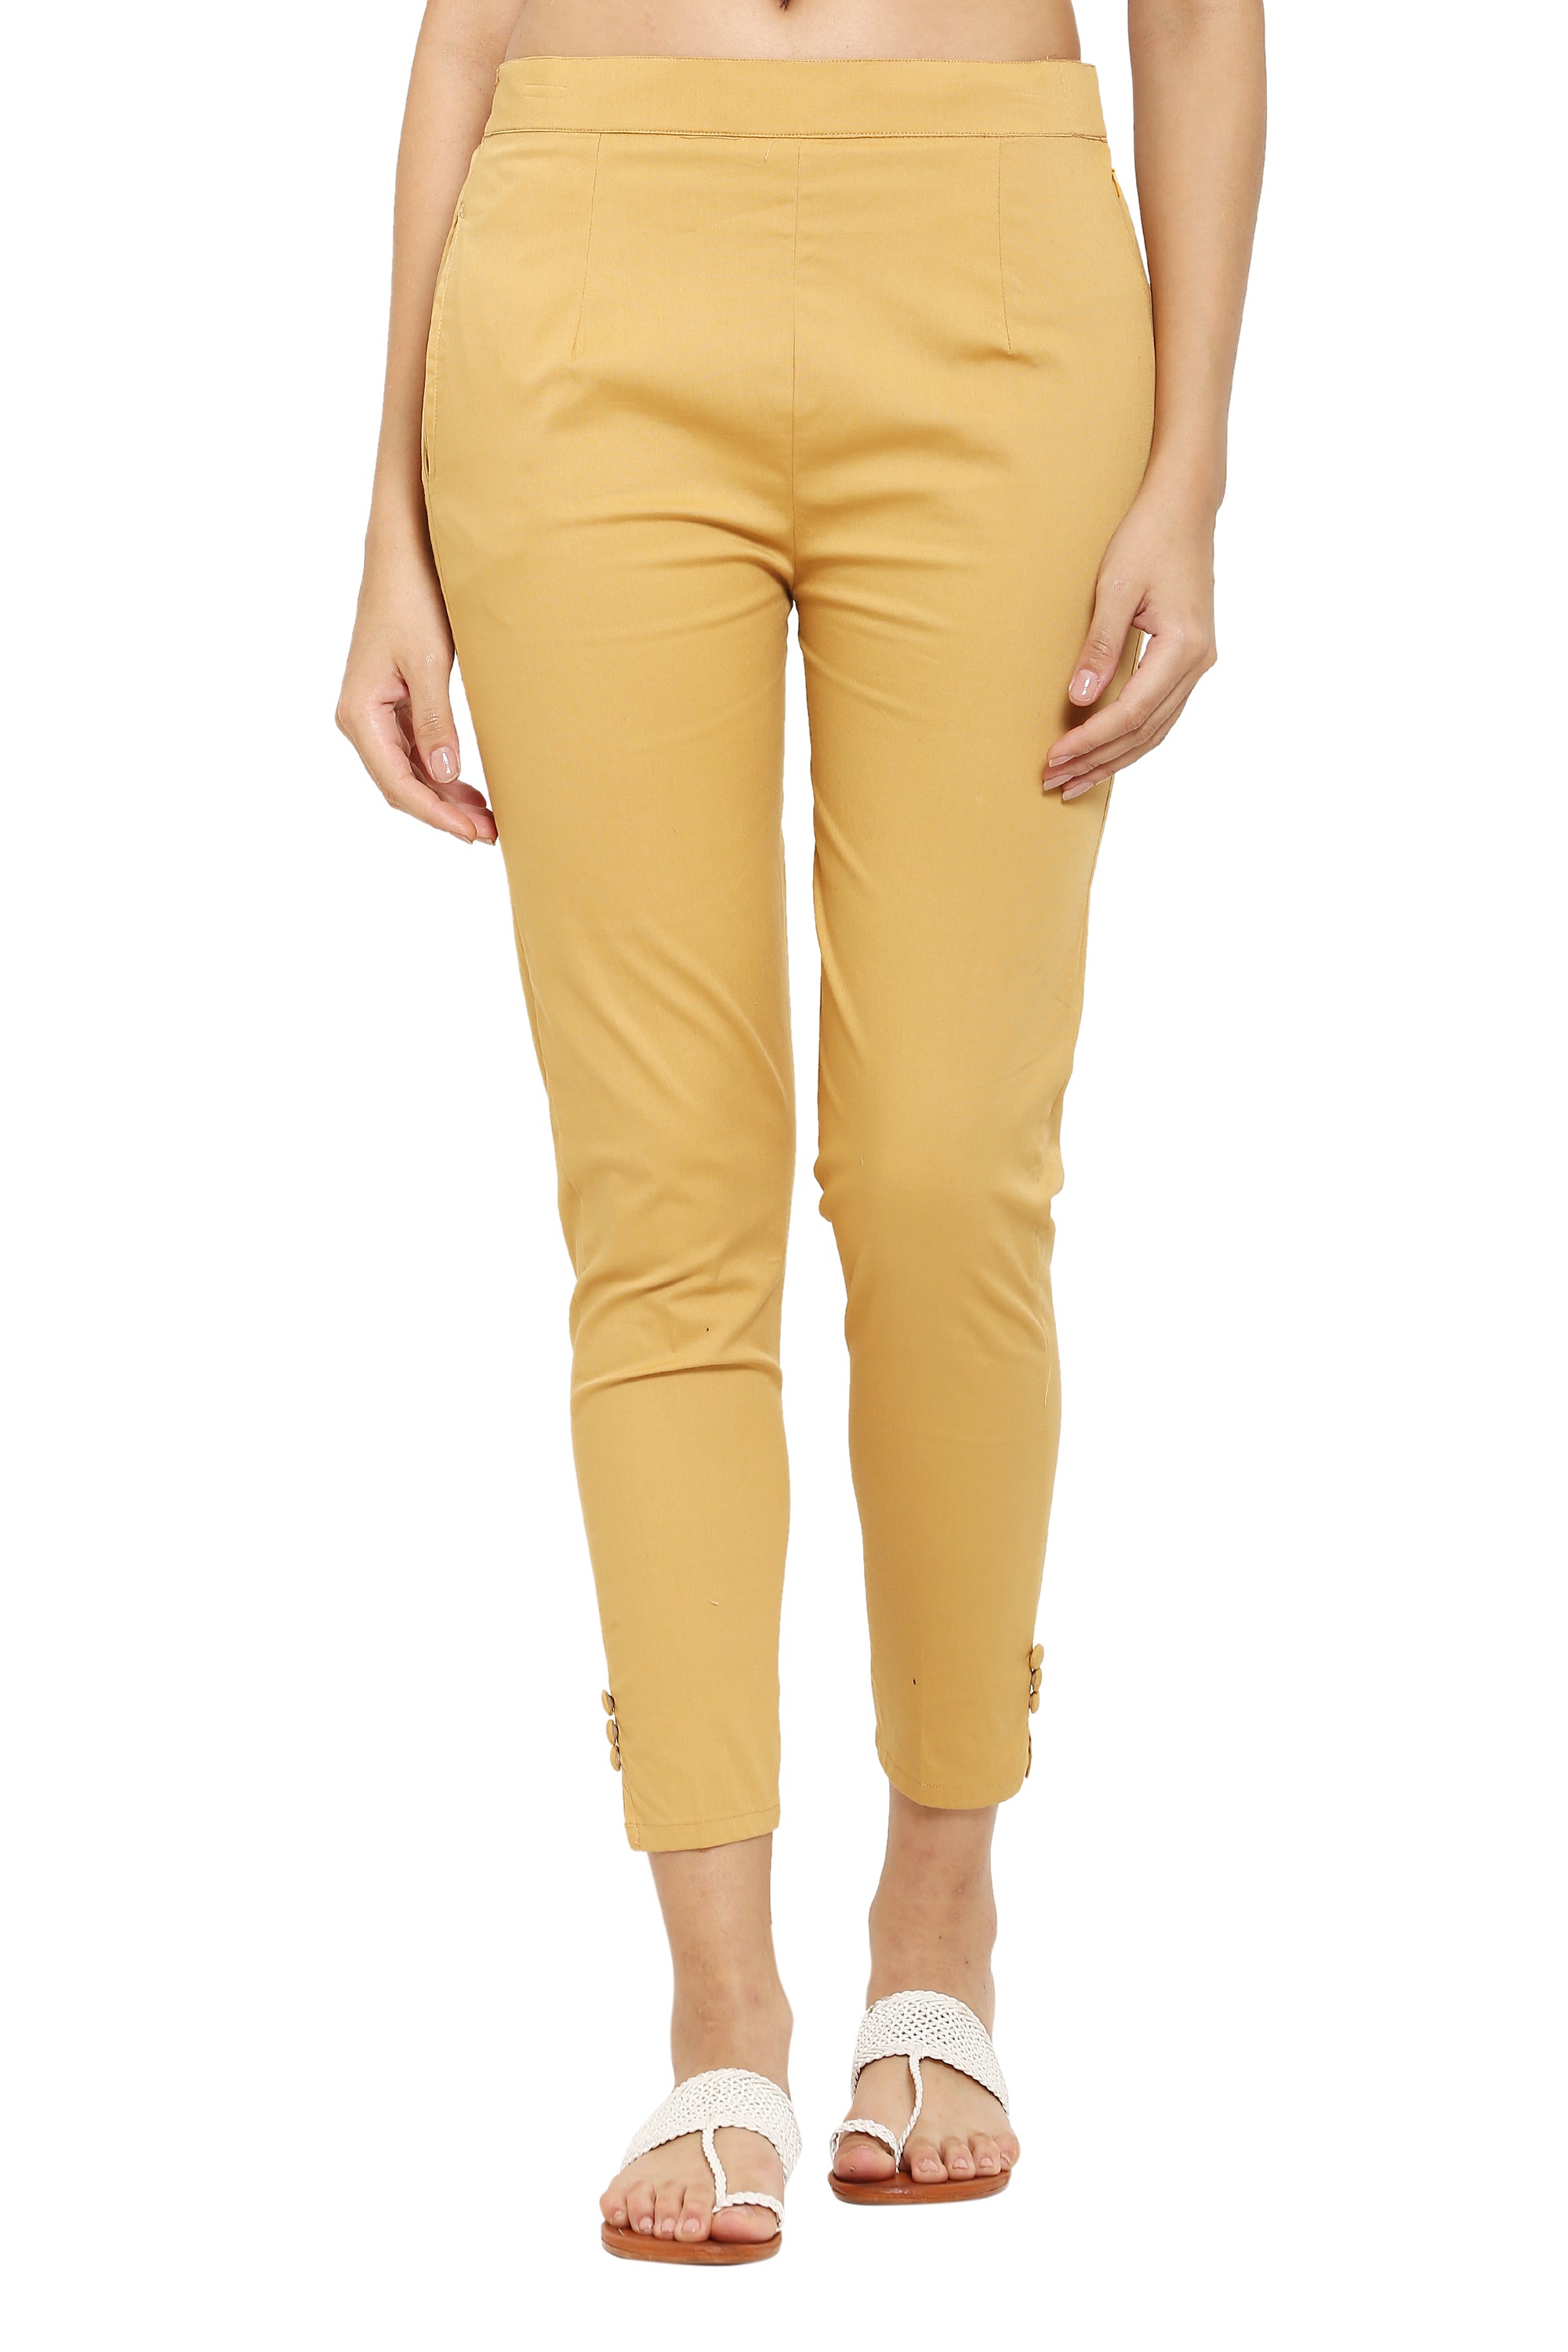 Buy Orange Roll Up Pant Cotton Lycra for Best Price, Reviews, Free Shipping